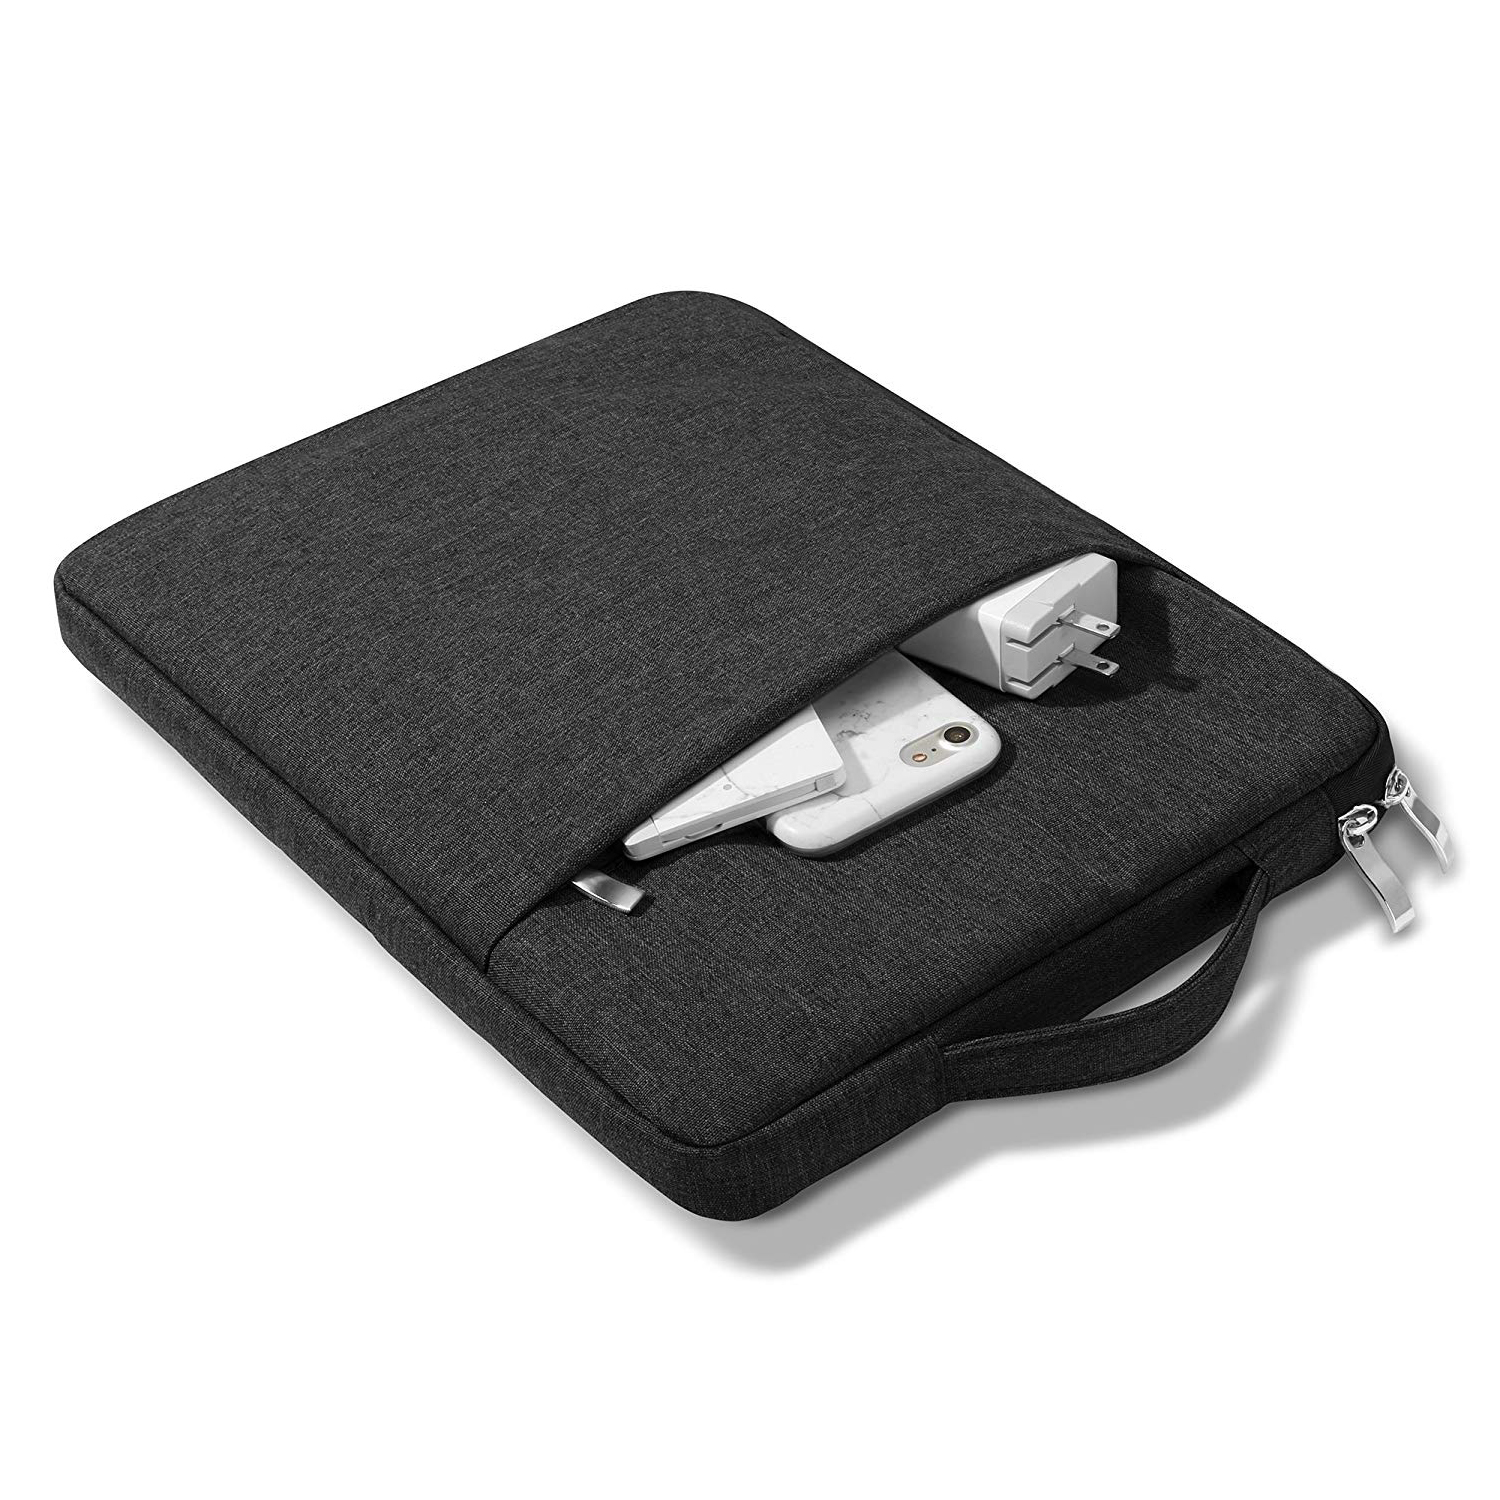 Handbag Sleeve Case for iPad Pro 12.9 4th Generation 2020 Shockproof Pouch Bag Cover for iPad 12.9'' 2017/2015/2018/ 2020 Case